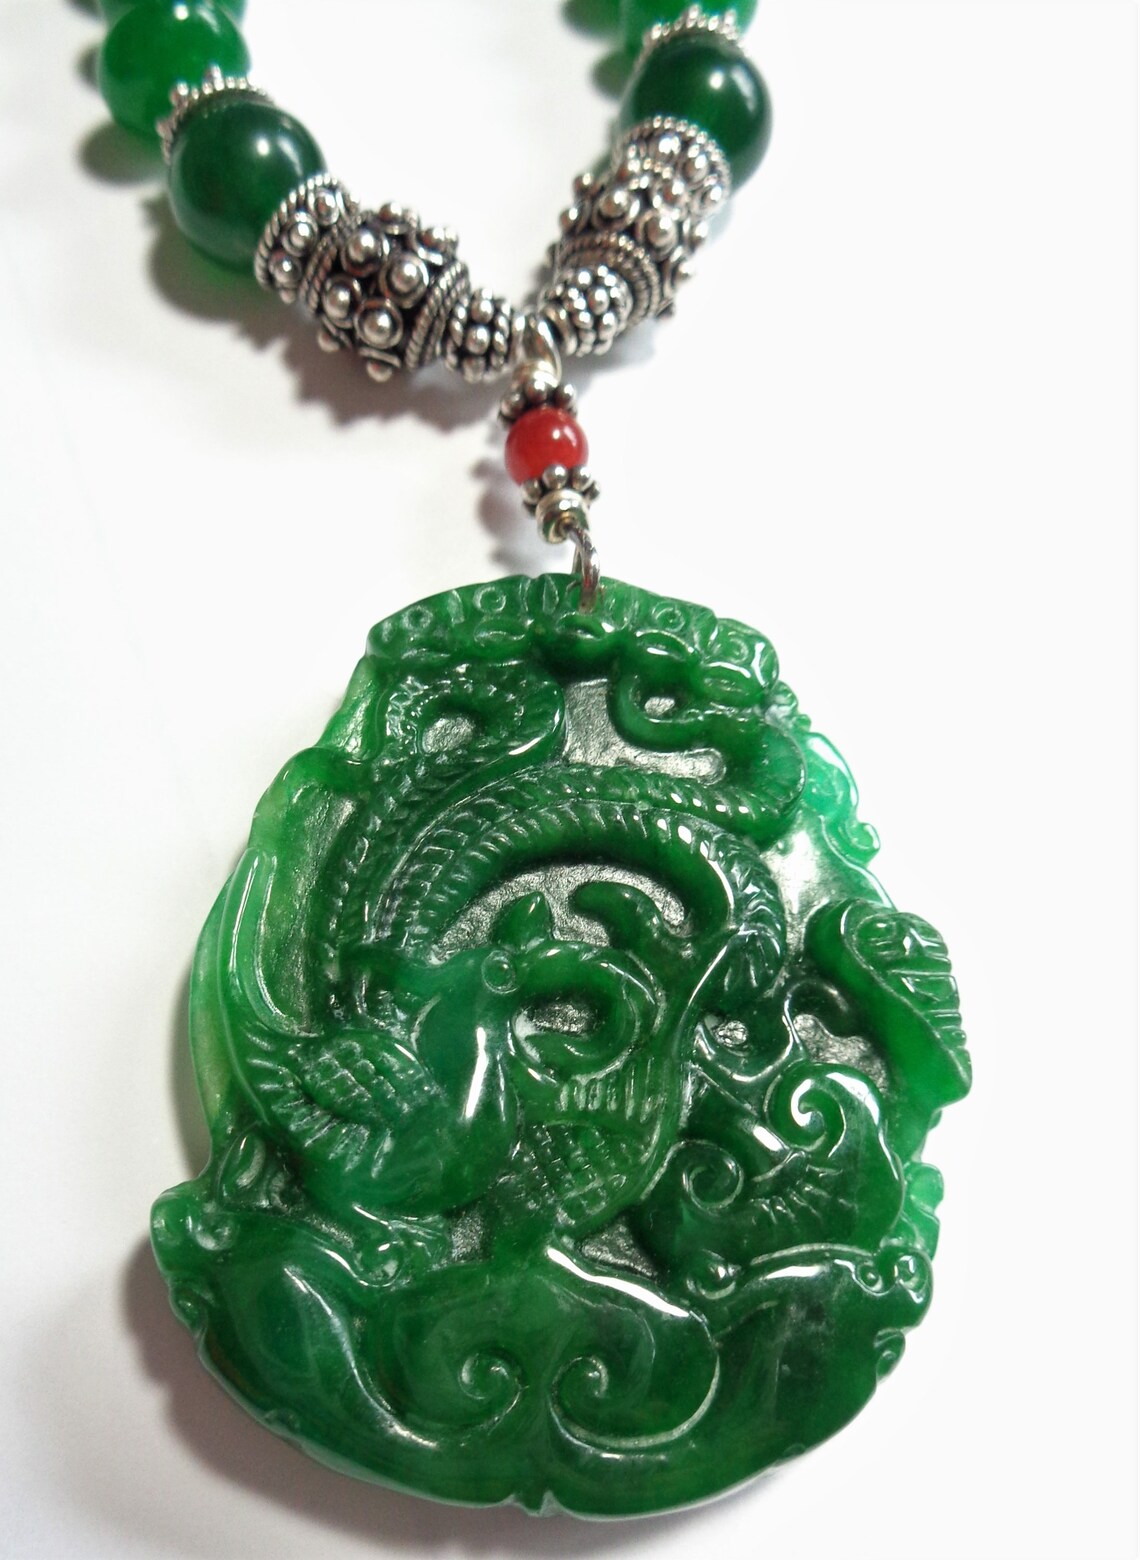 Jade Dragon and Phoenix Necklace in Imperial Green Jadeite is | Etsy